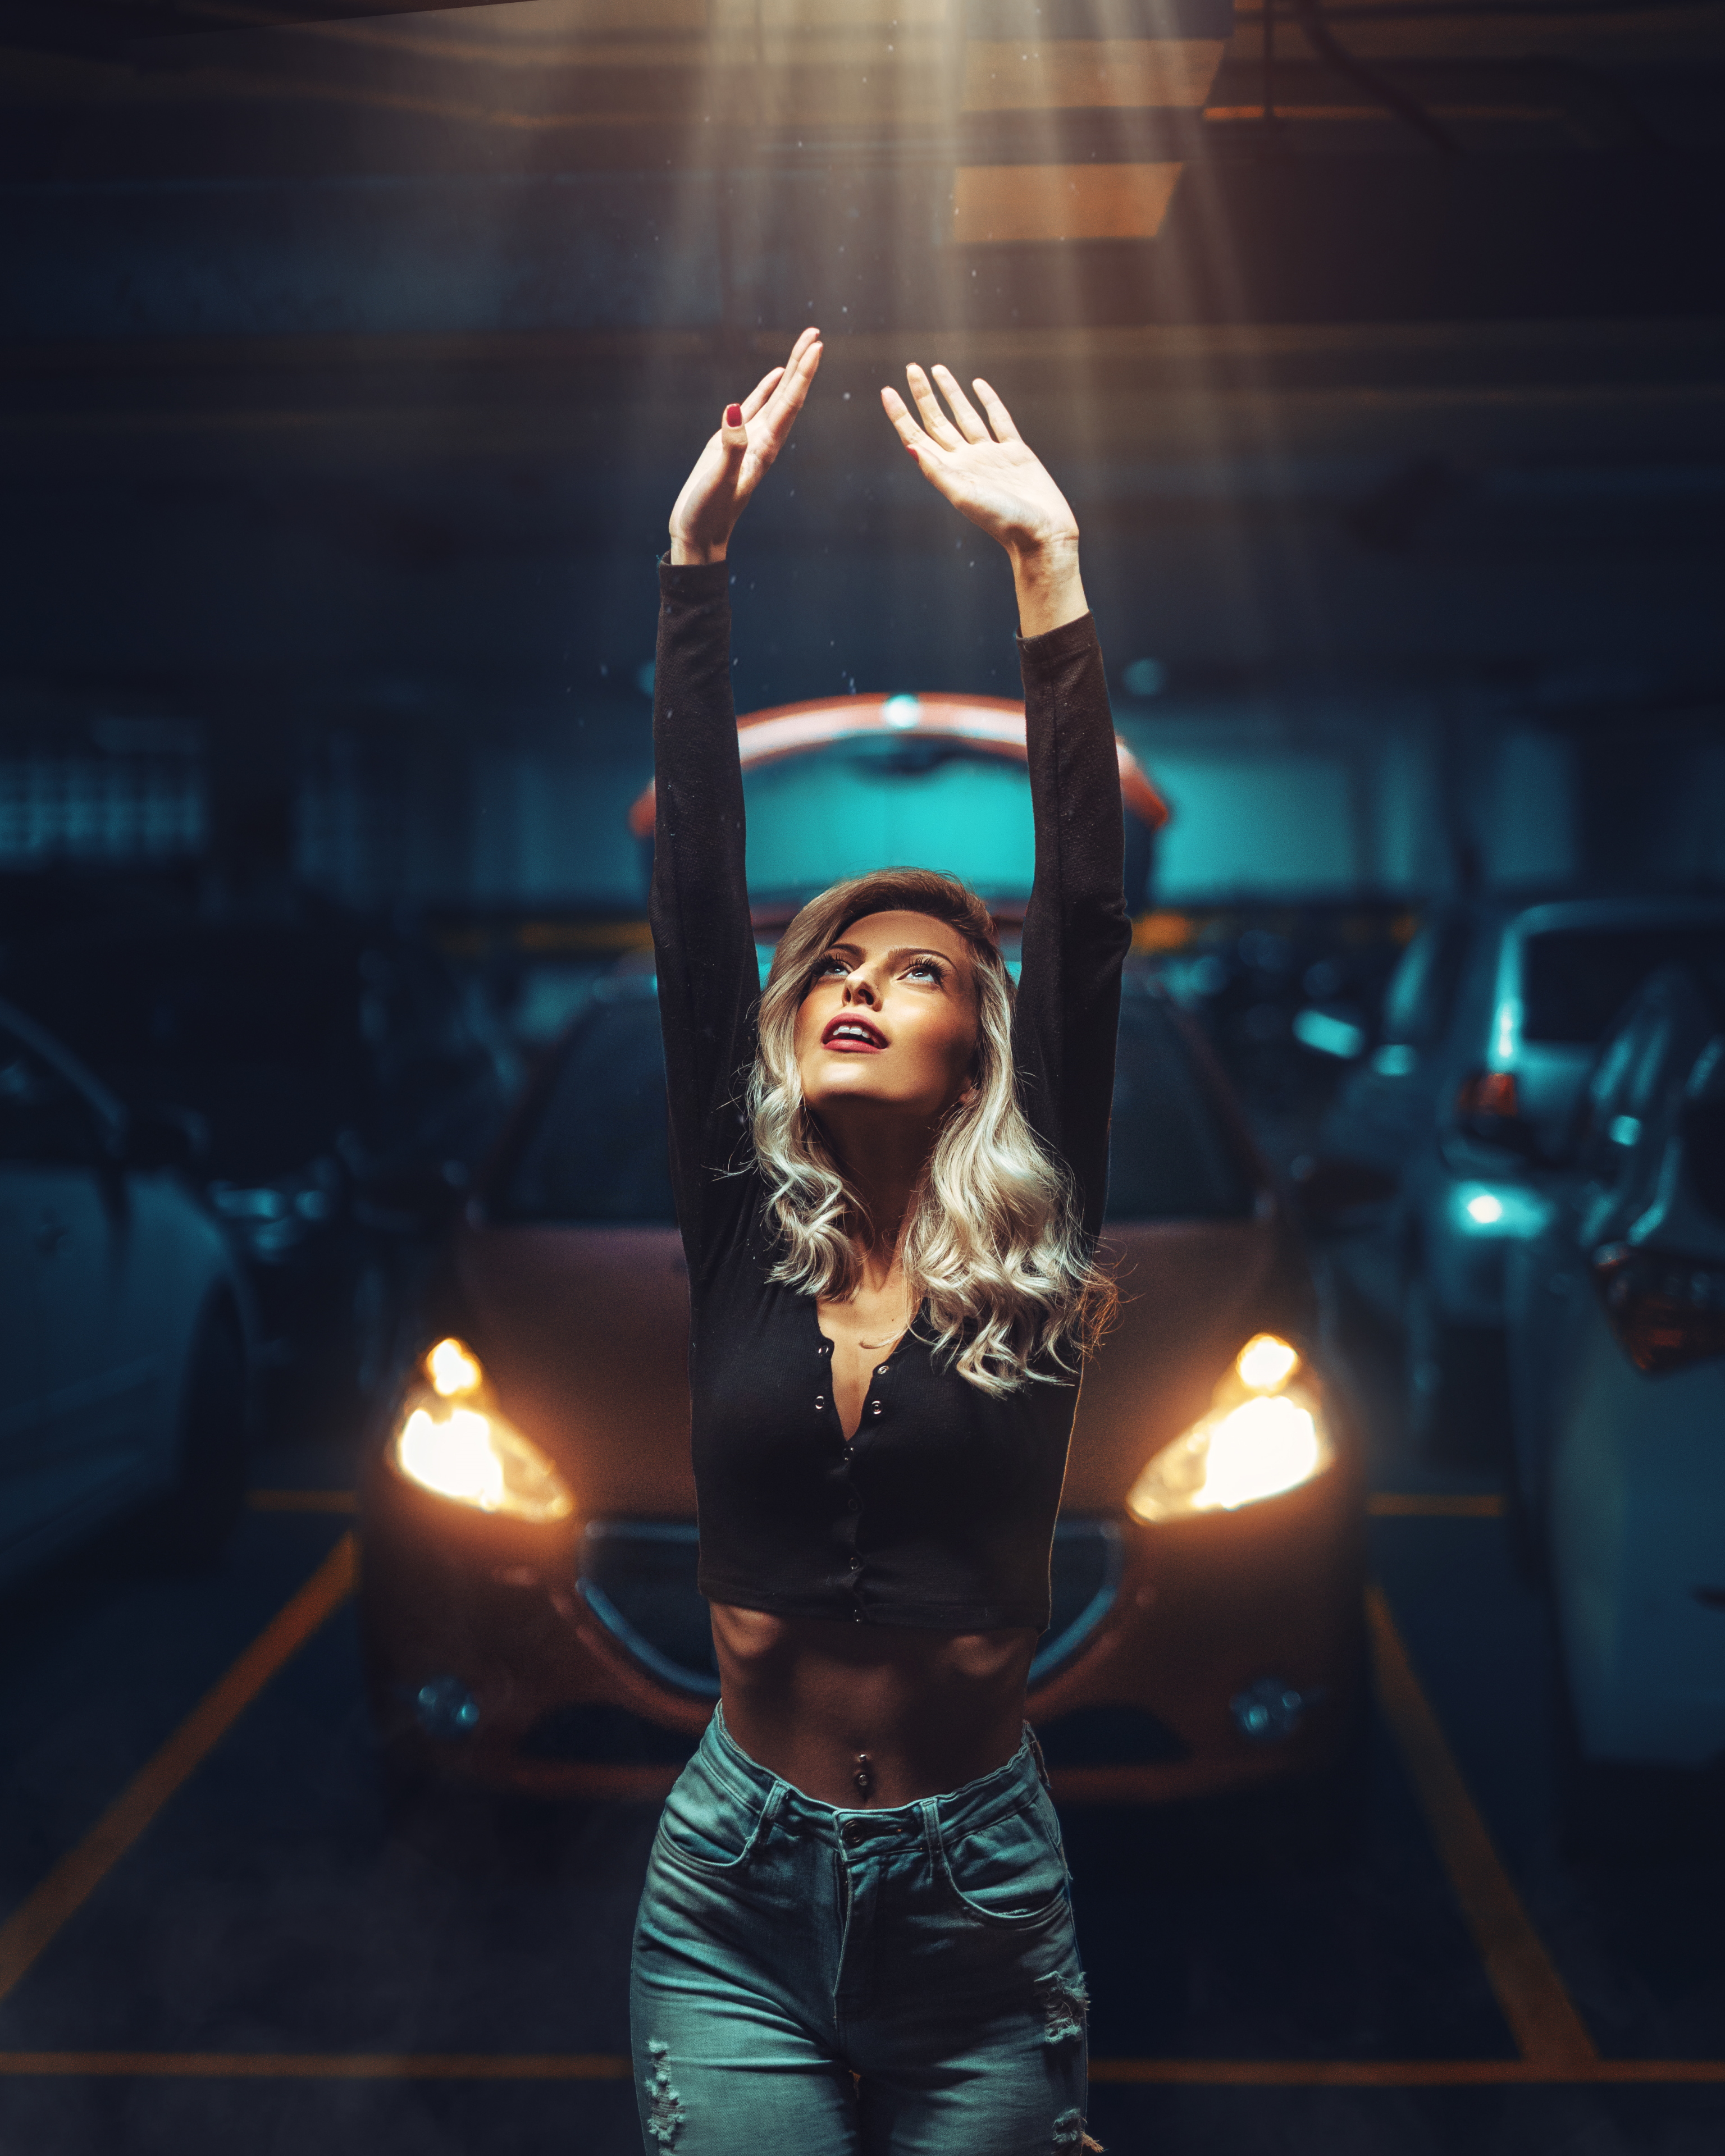 People 3072x3840 women model blonde portrait display black top cleavage belly pierced navel jeans torn jeans arms up ribs looking up lights frontal view depth of field parking parking lot car women with cars smiling Peugeot Peugeot 208 headlight beams